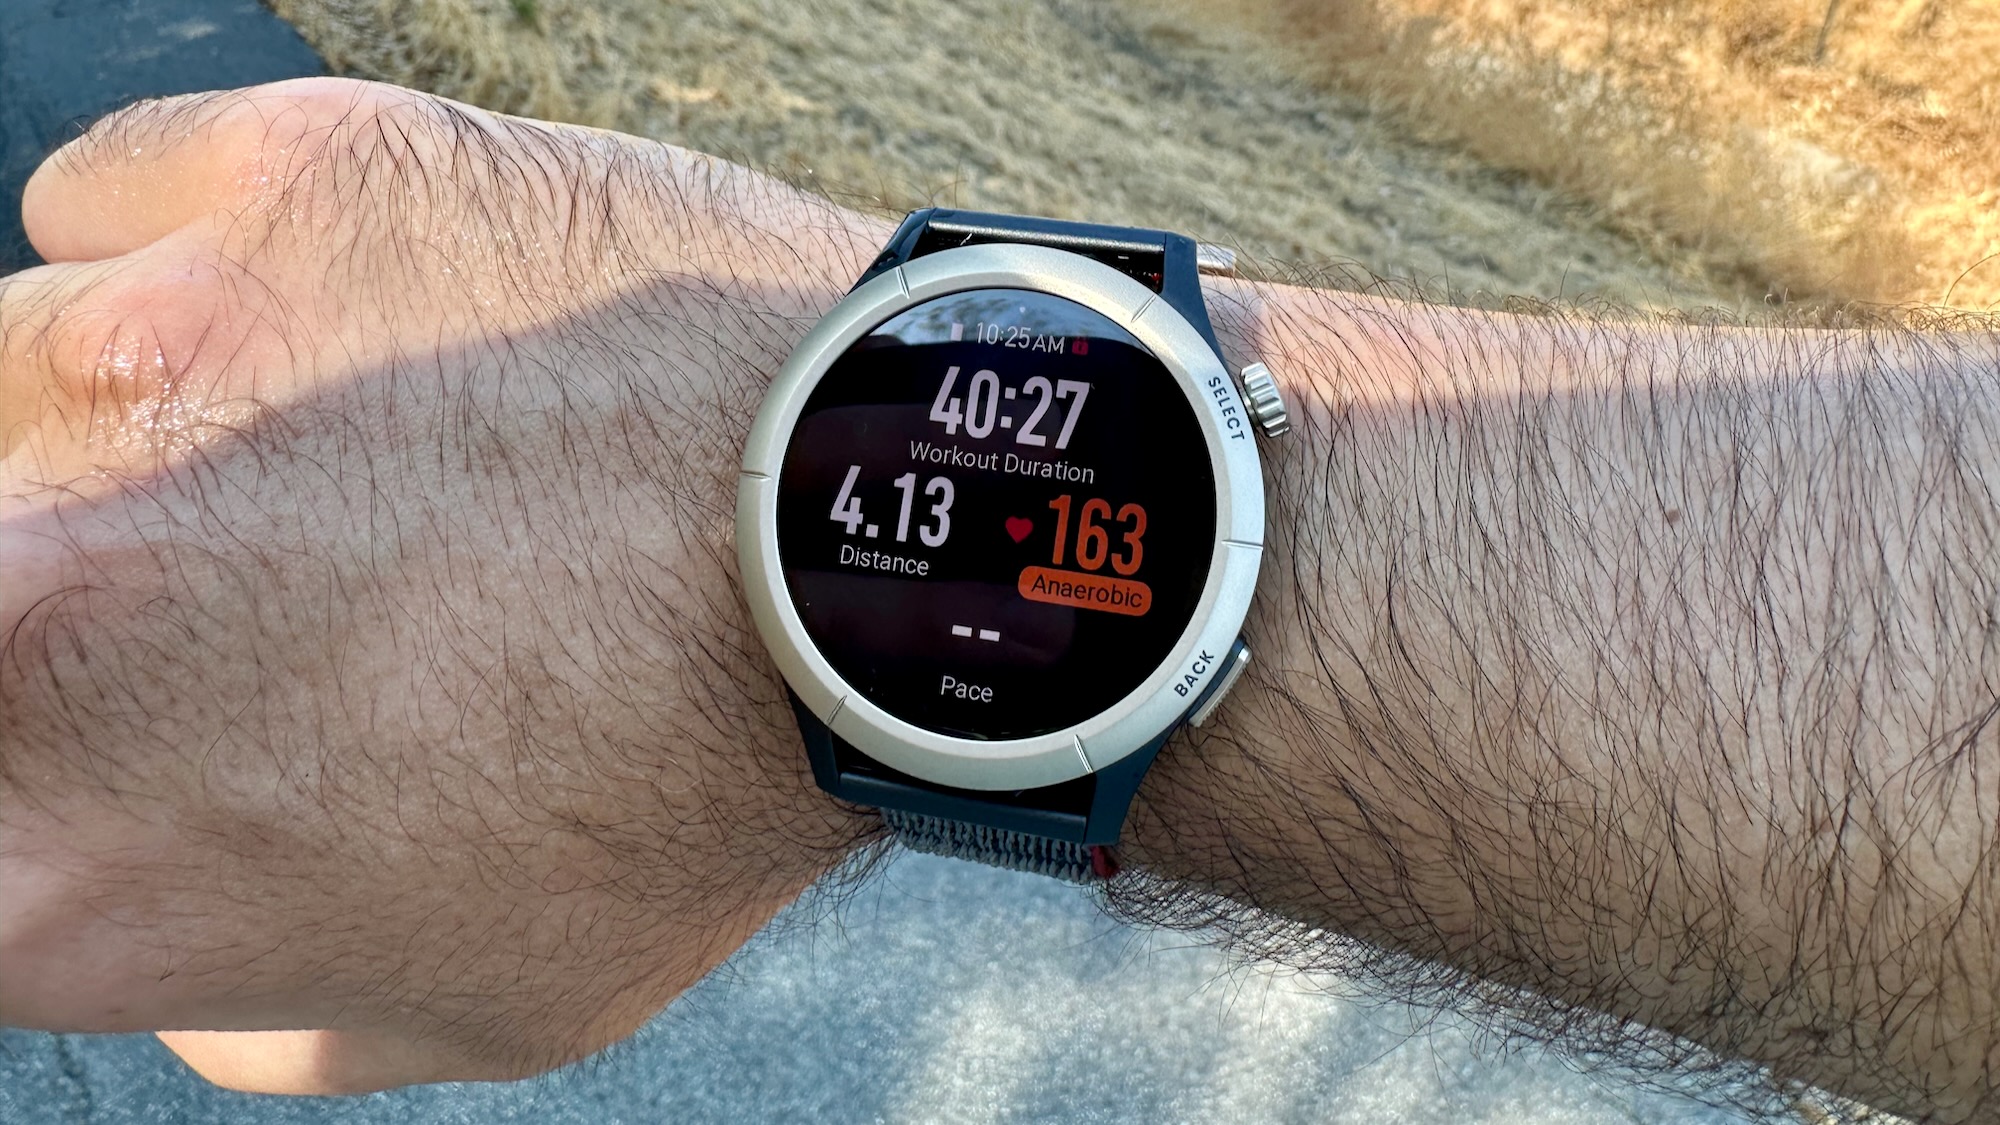 What exercise apps work with the Amazfit Cheetah Round and Cheetah